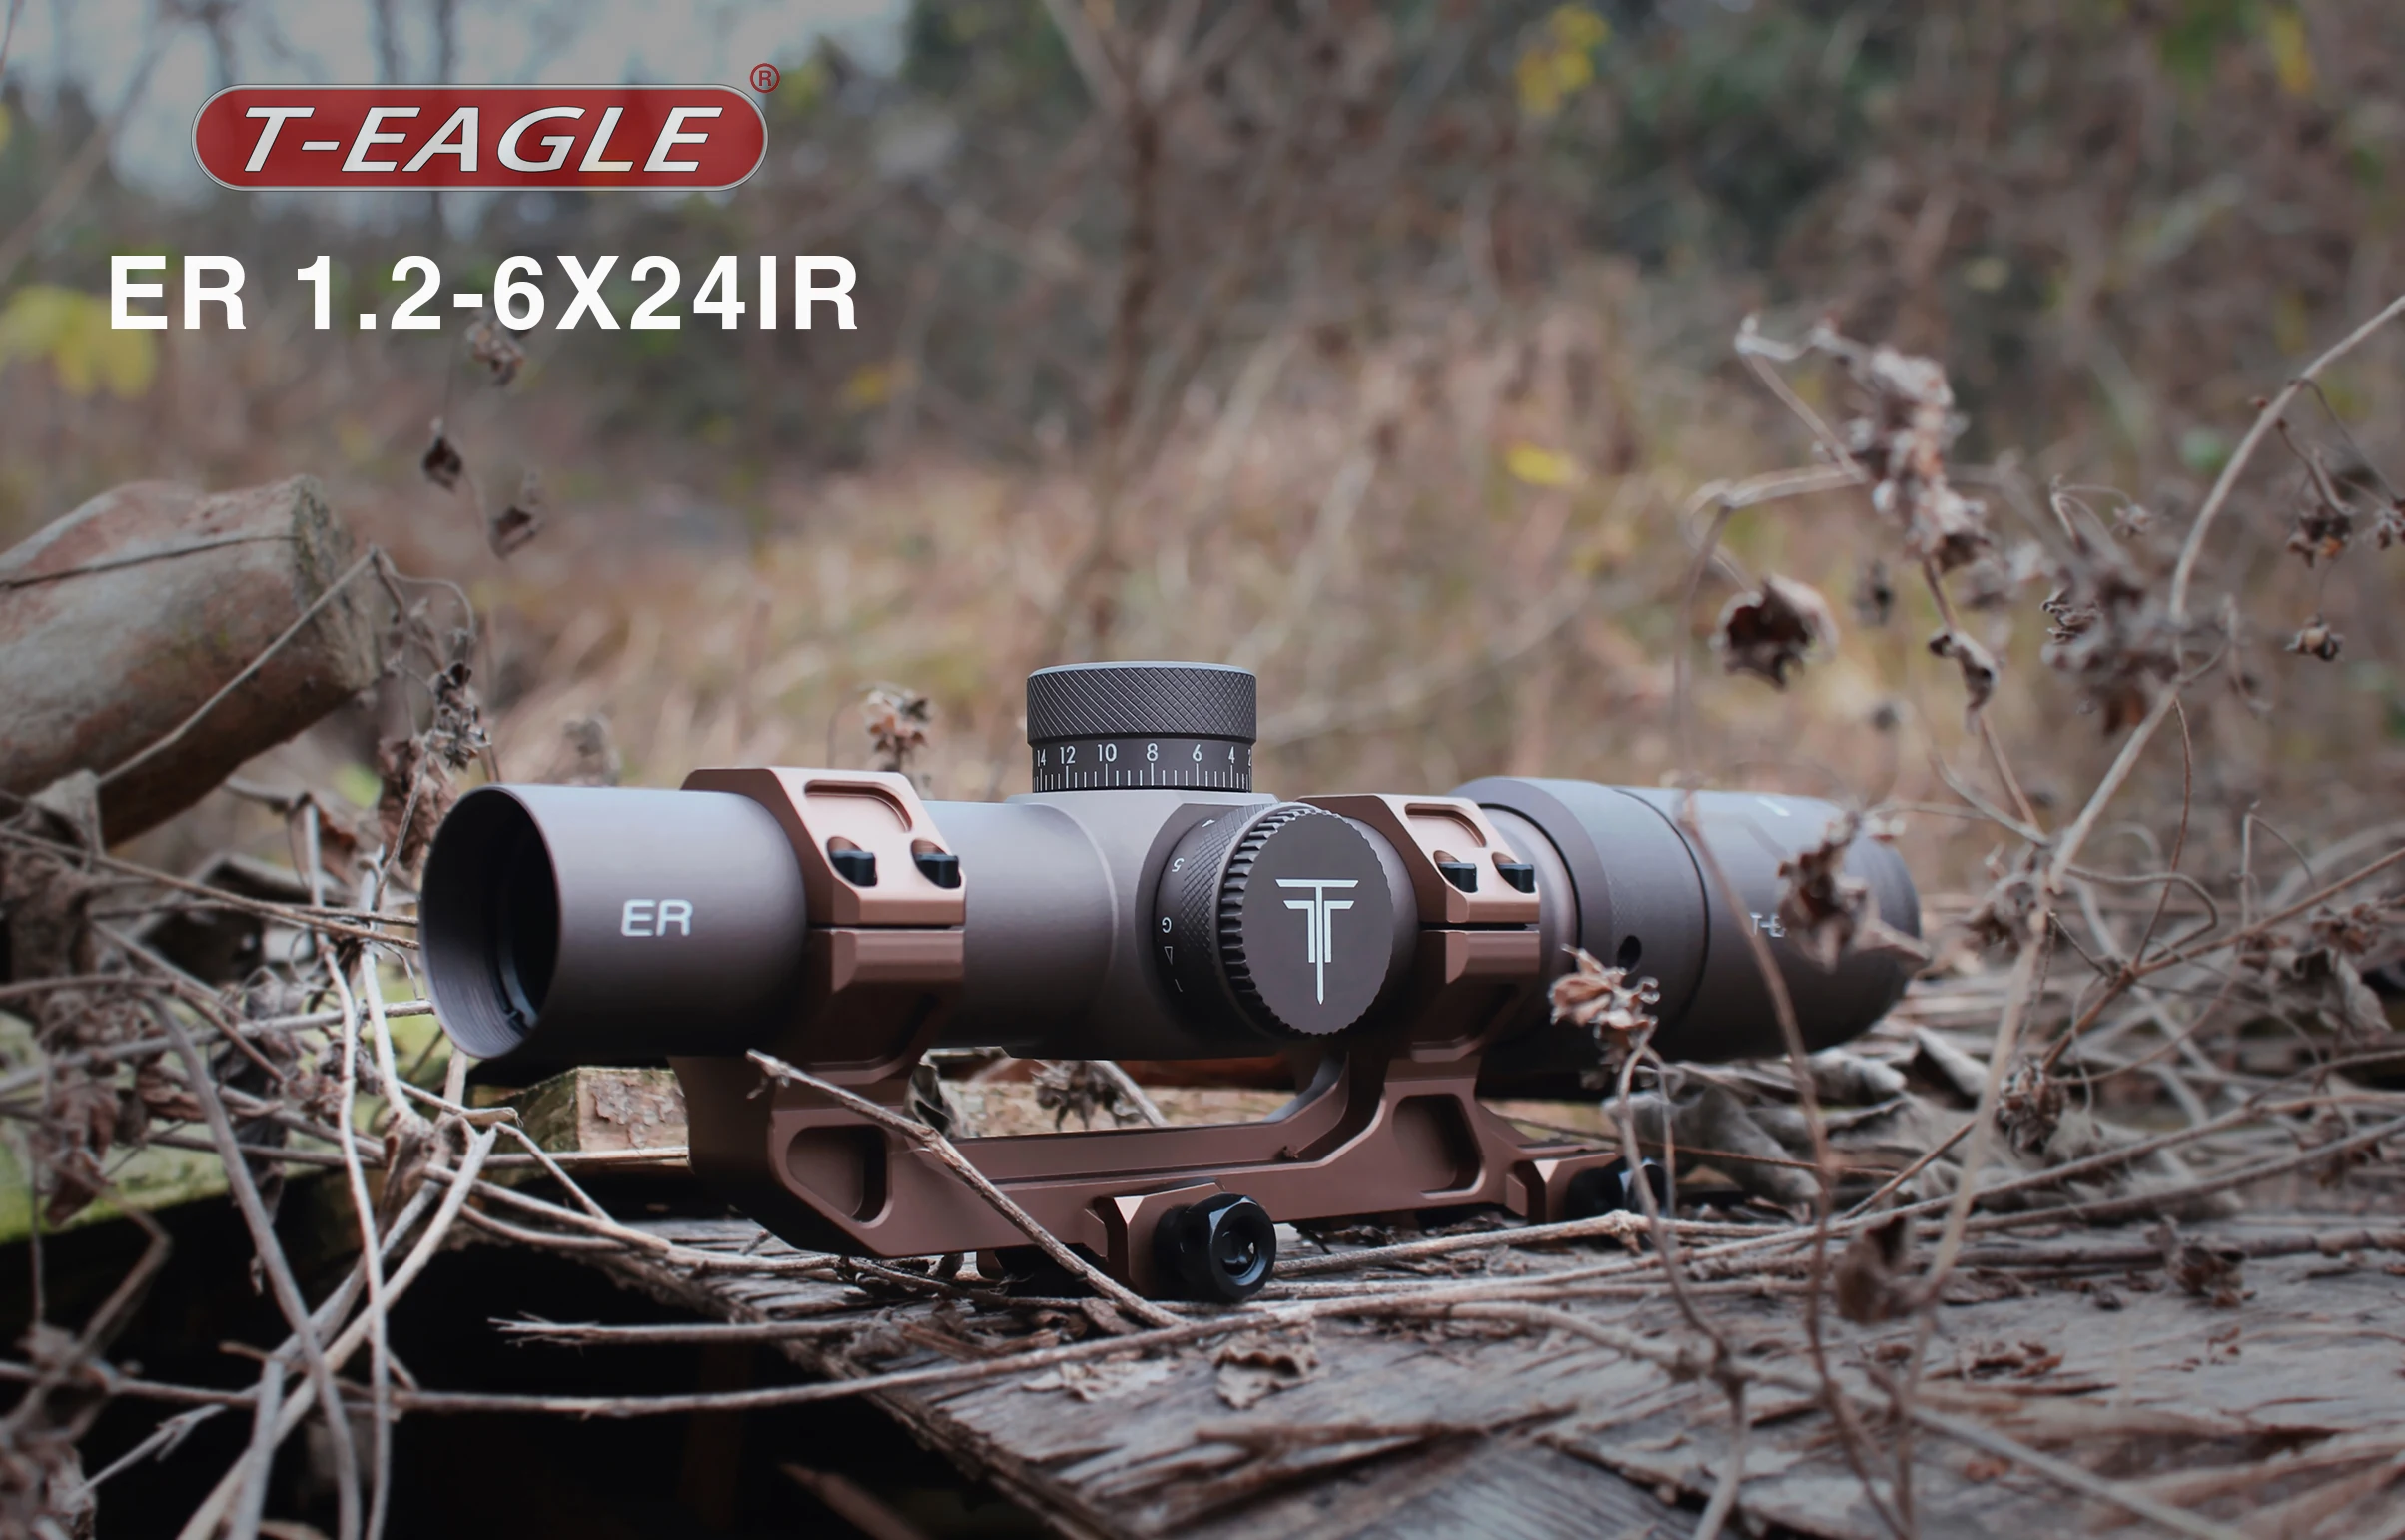 

Teagle ER 1.2-6X24 IR Brown Color Aluminum Tactical Optic Sight Riflescope Sniper Airsoft Air Guns Red Dot Mounts For Hunting